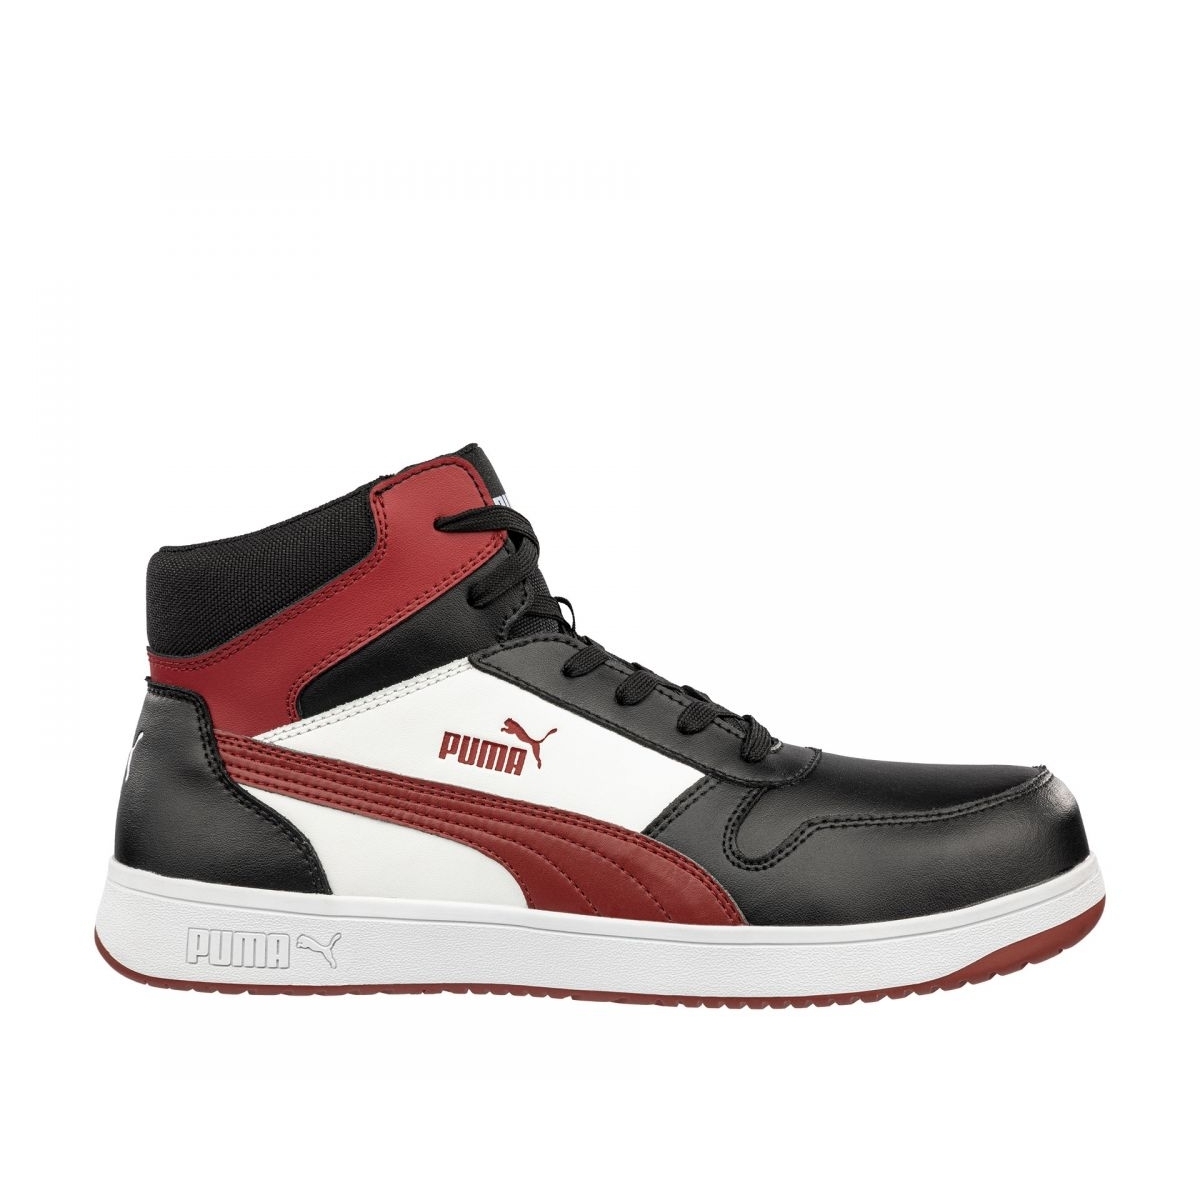 PUMA Safety Men's Frontcourt Mid Composite Toe Waterproof Work Boot Black/White/Red - 630055 BLK/ WHT/RED - BLK/ WHT/RED, 8